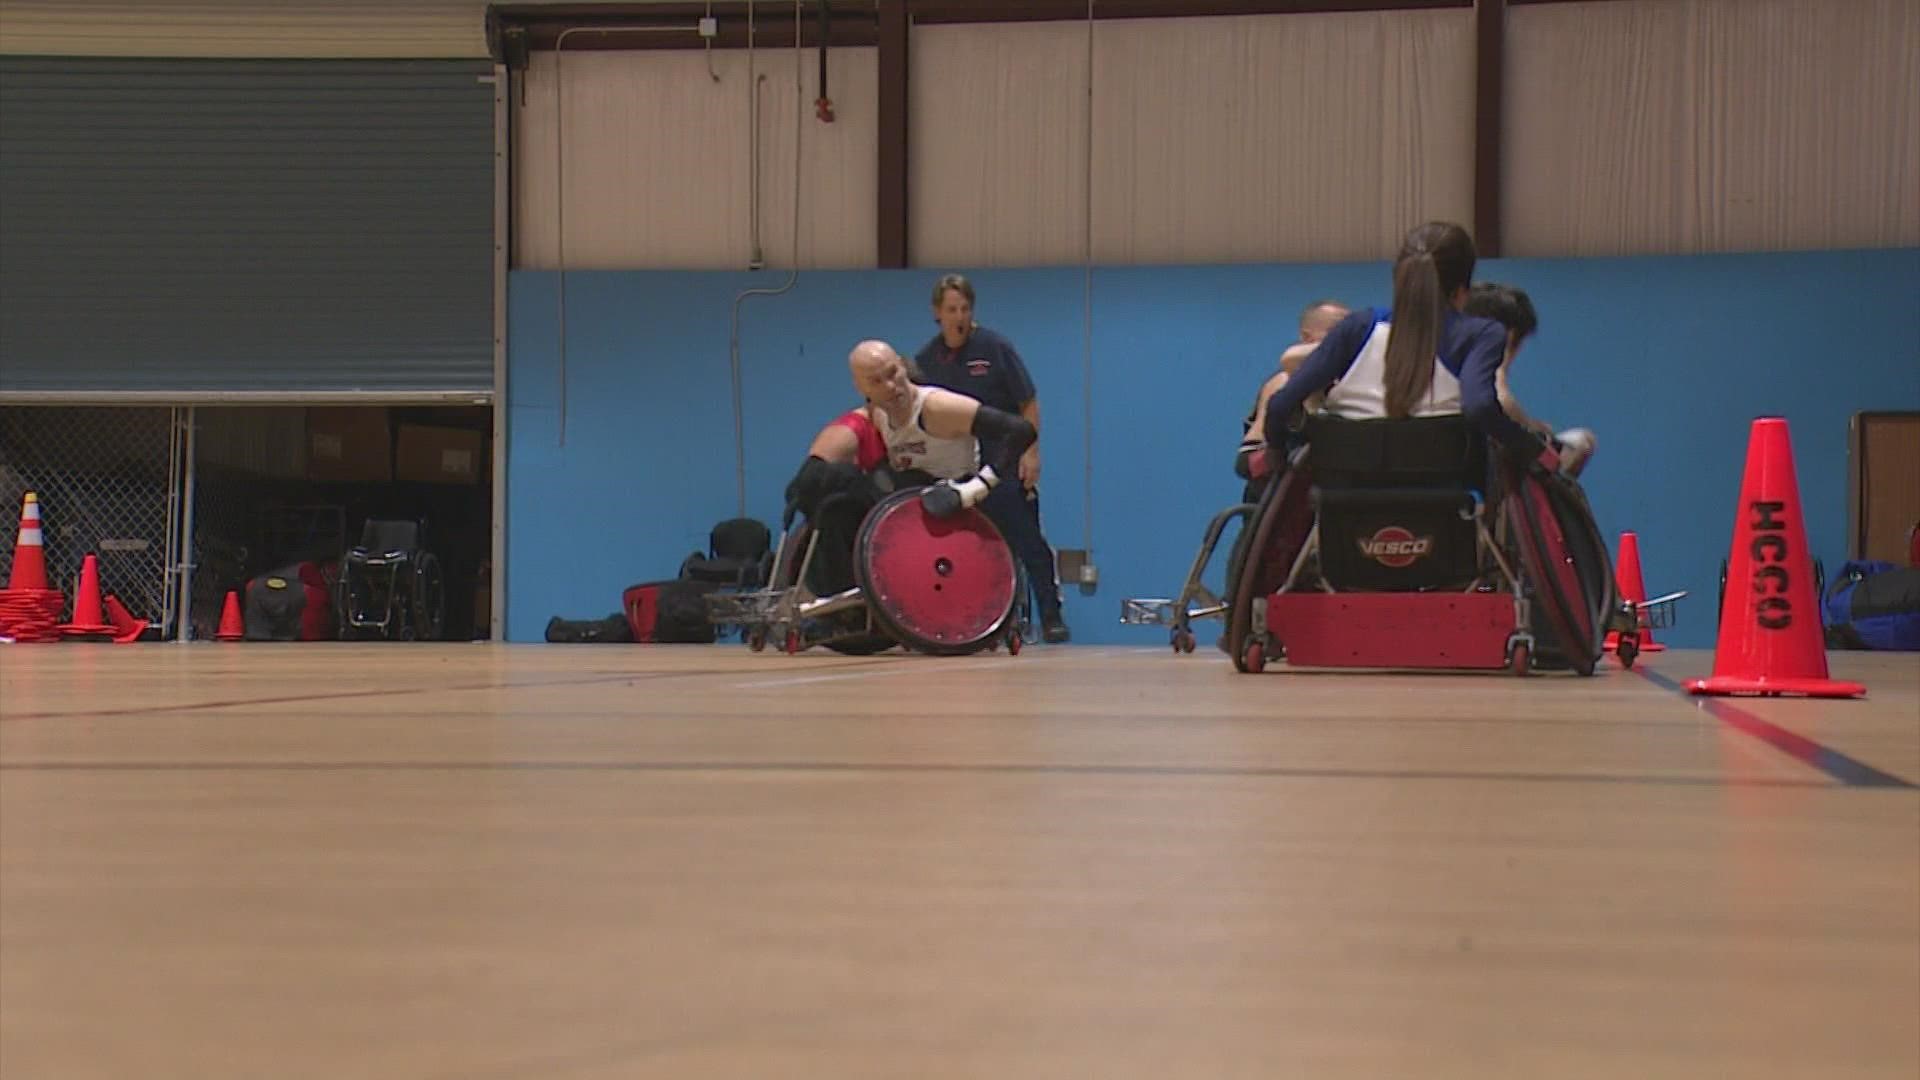 The first national tryout for the USA Low Point Wheelchair Rugby Team is being held this weekend in southwest Houston.